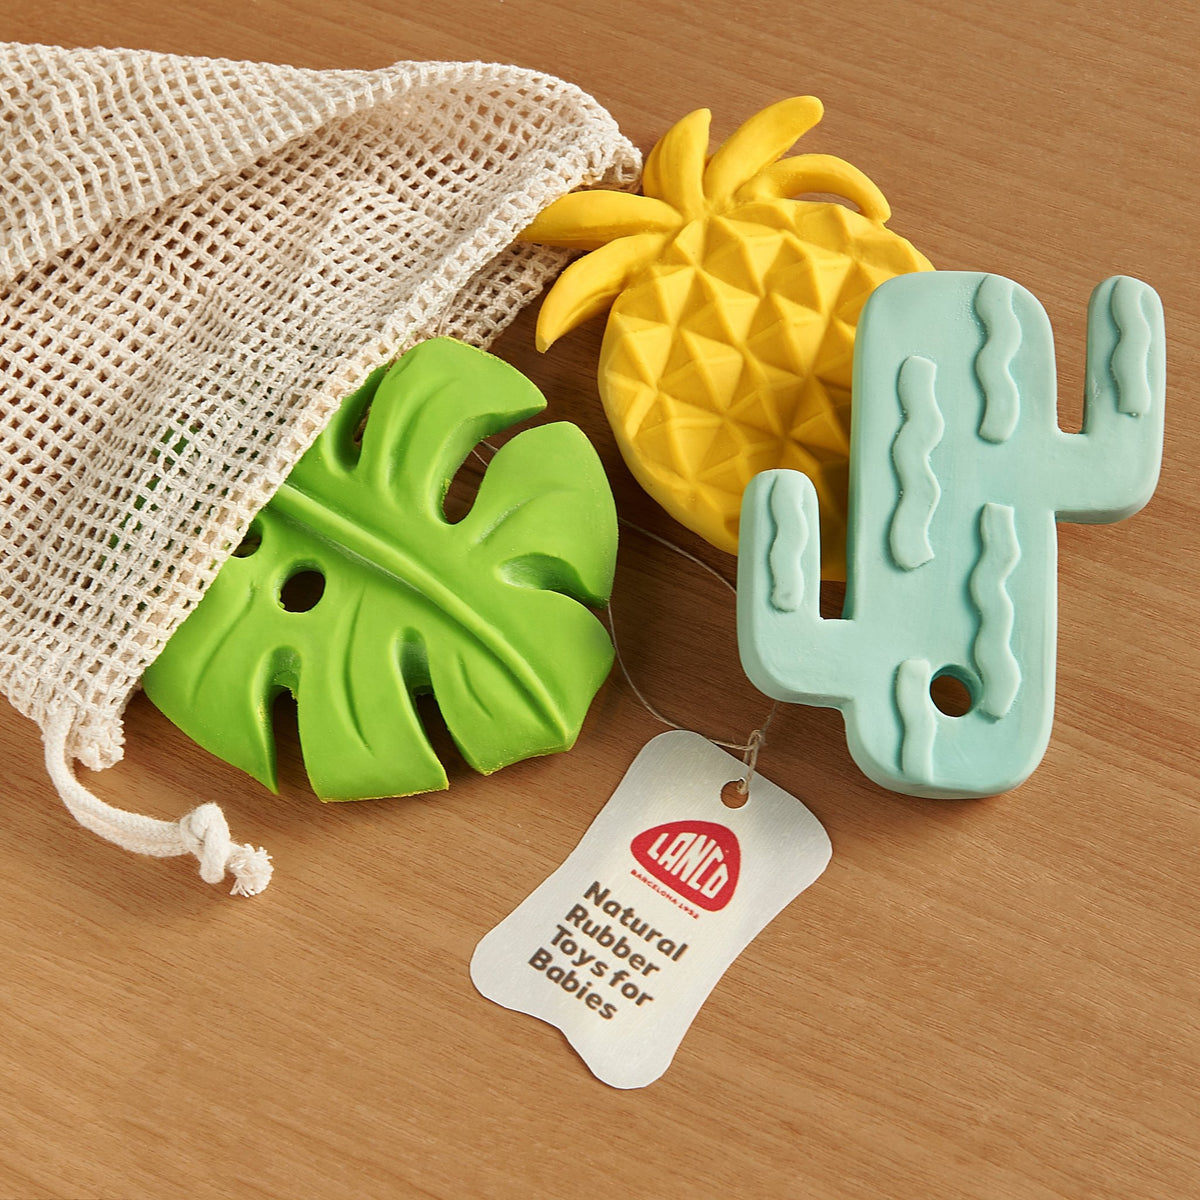 SEMILLA 3-Set (534 Pineapple, 418 Leaf, 533 Cactus), fully moulded - Natural Rubber Toys